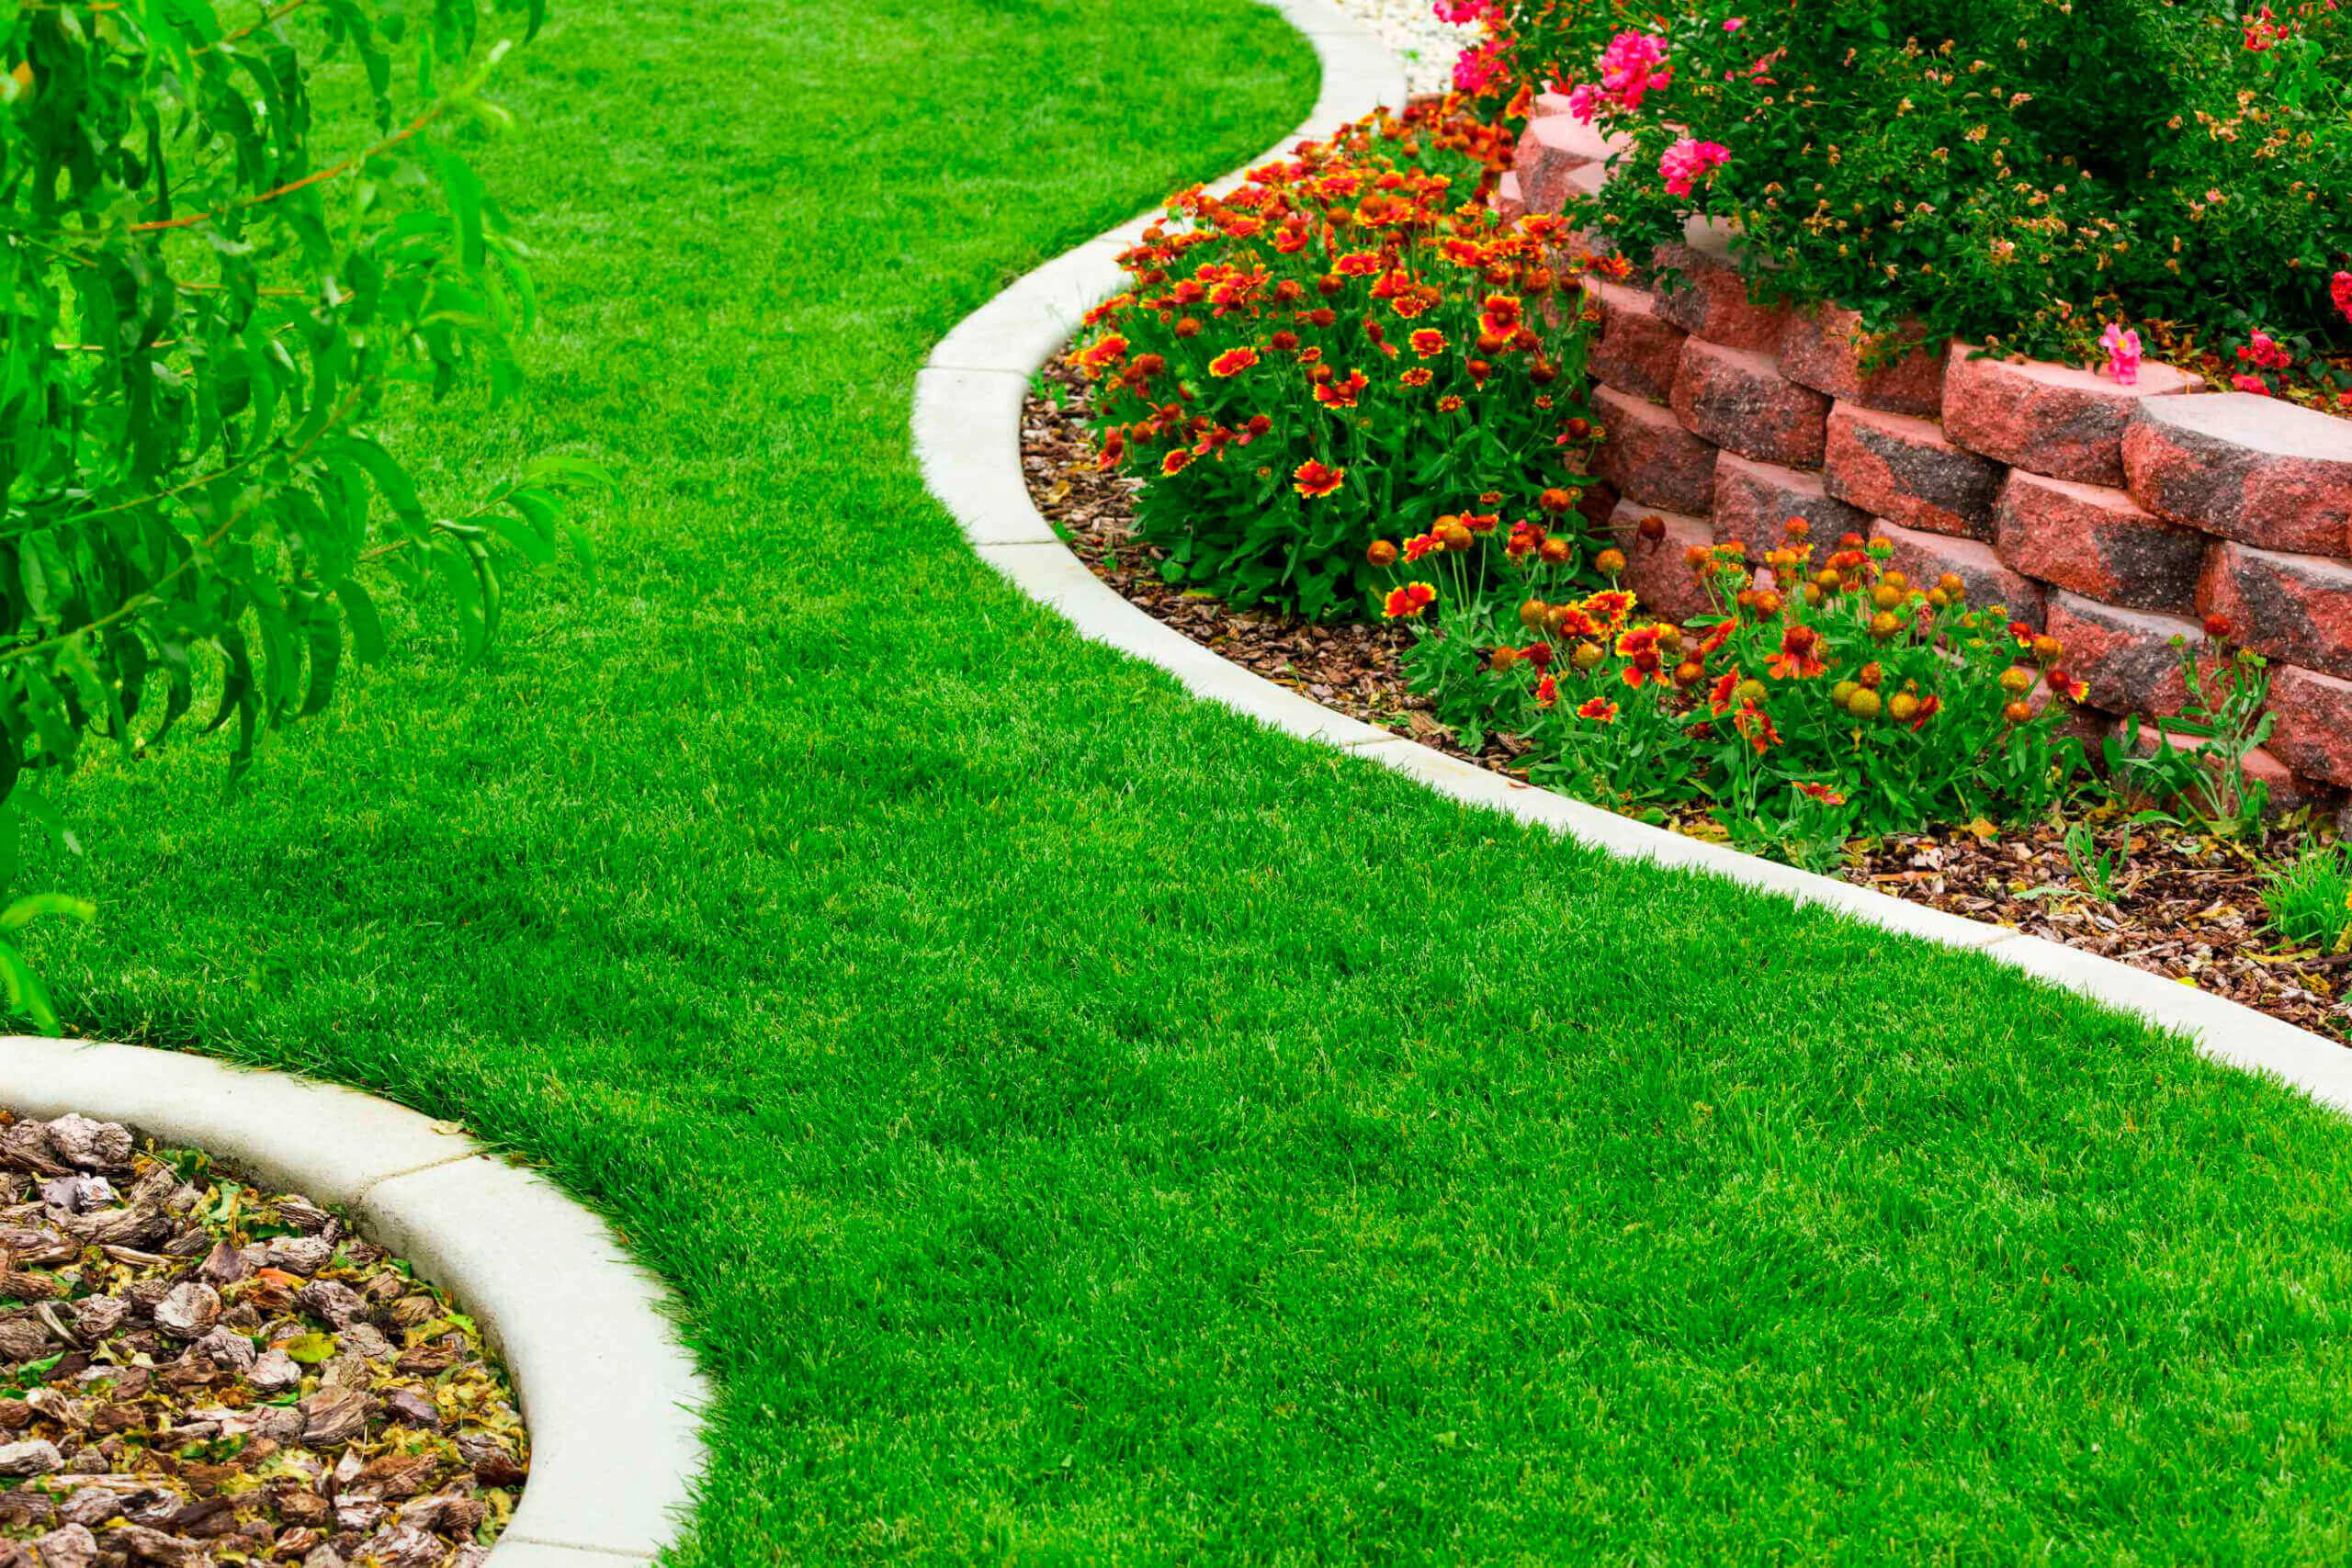 How to Choose the Right Plants for Your Landscape Design